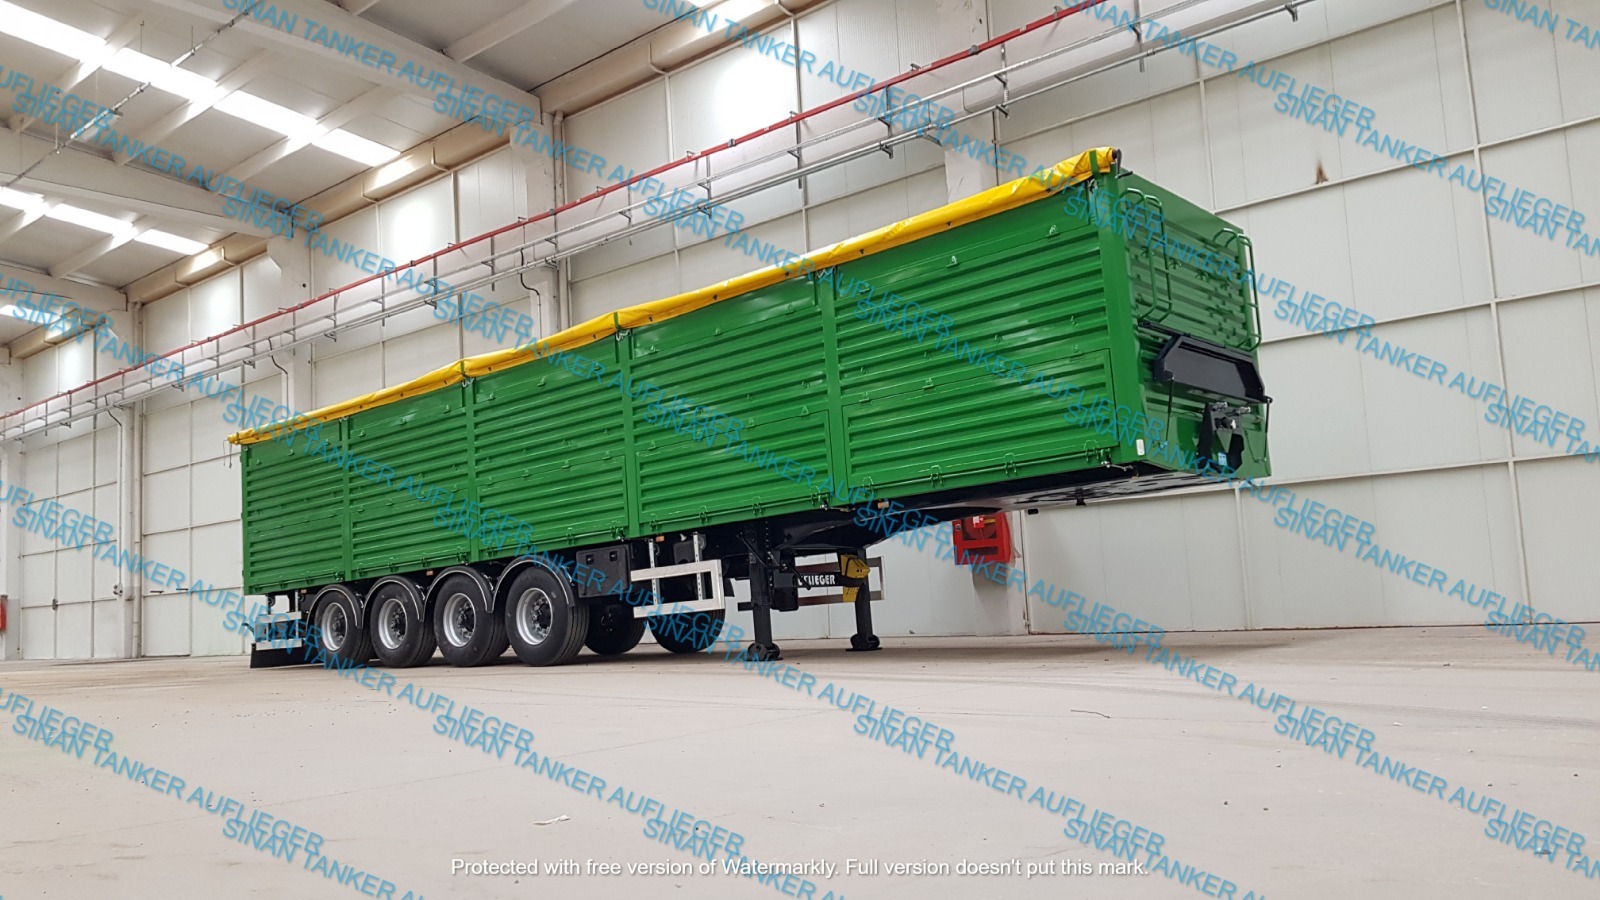 SİNANLI TANKER - TRAILER undefined: photos 13